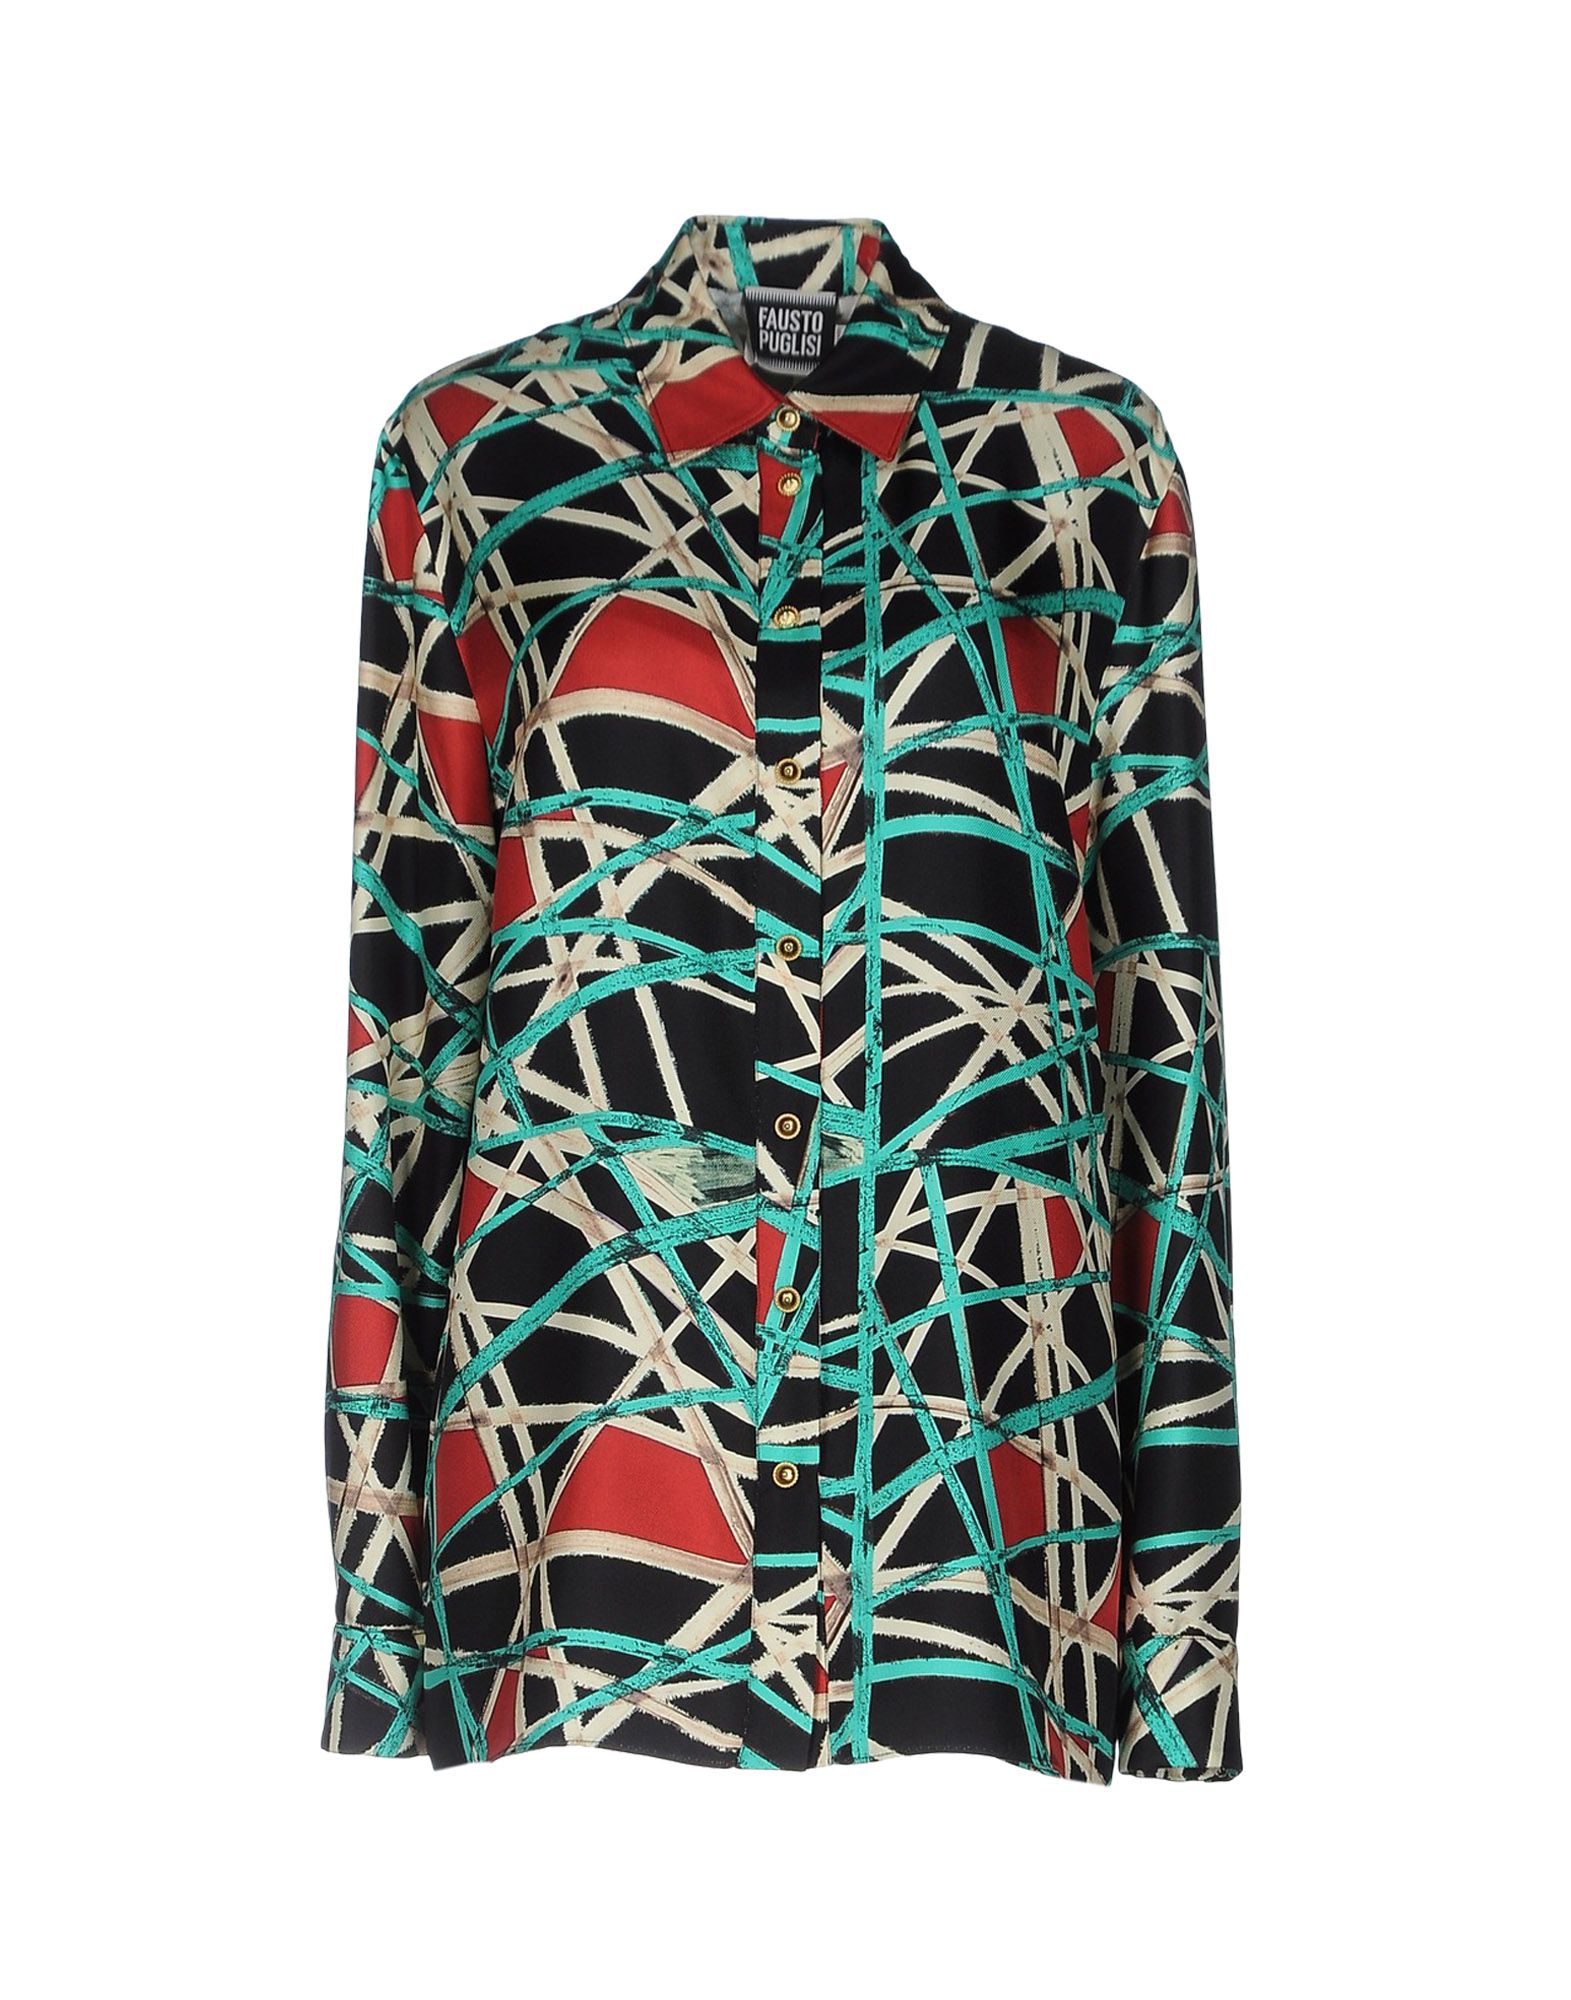 FAUSTO PUGLISI PATTERNED SHIRTS & BLOUSES,38644779OI 4